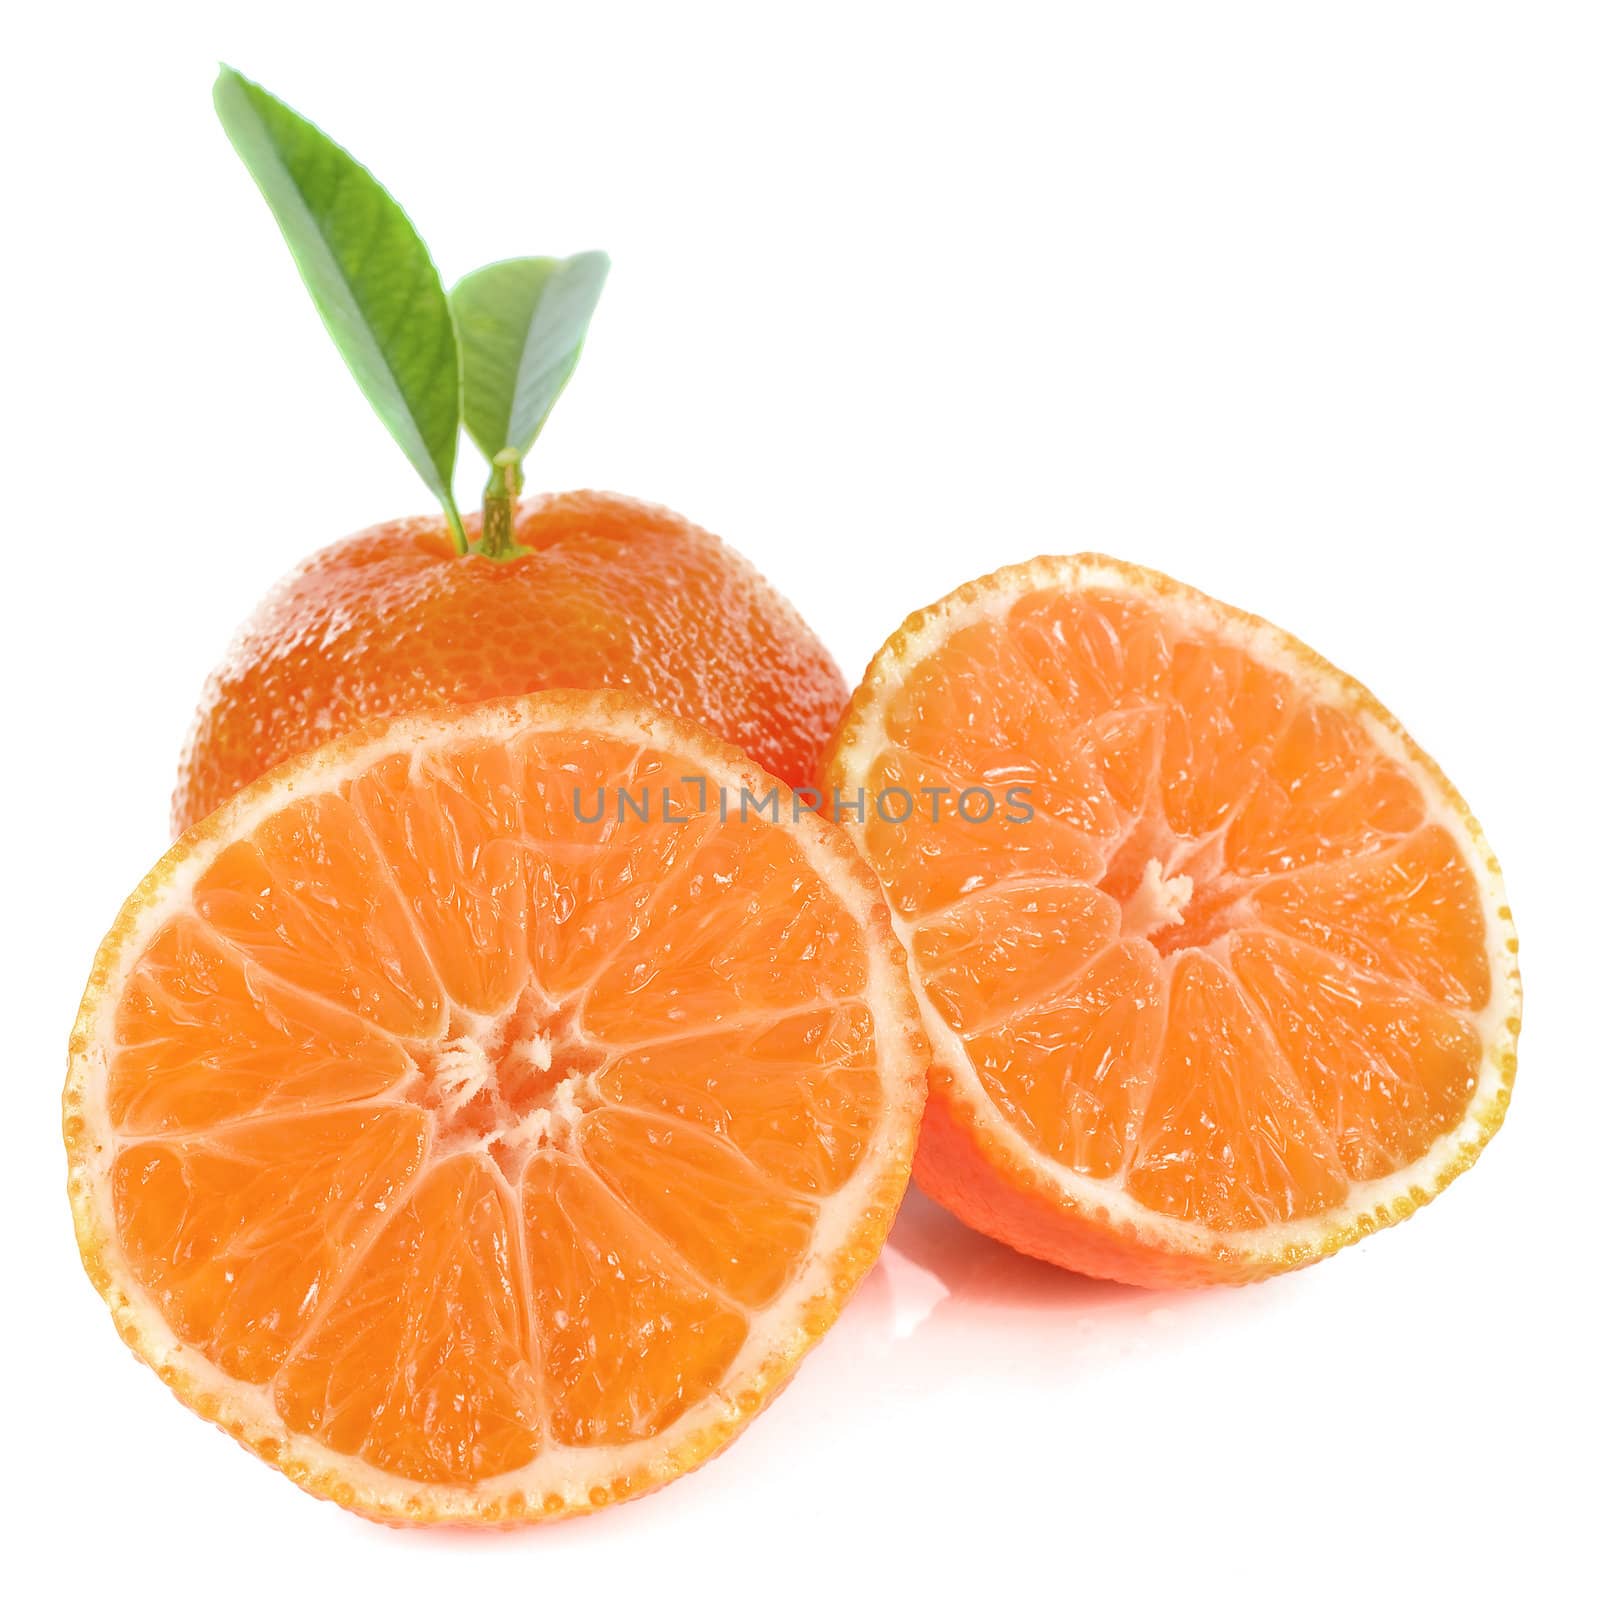 two citrus fruits in front of white background